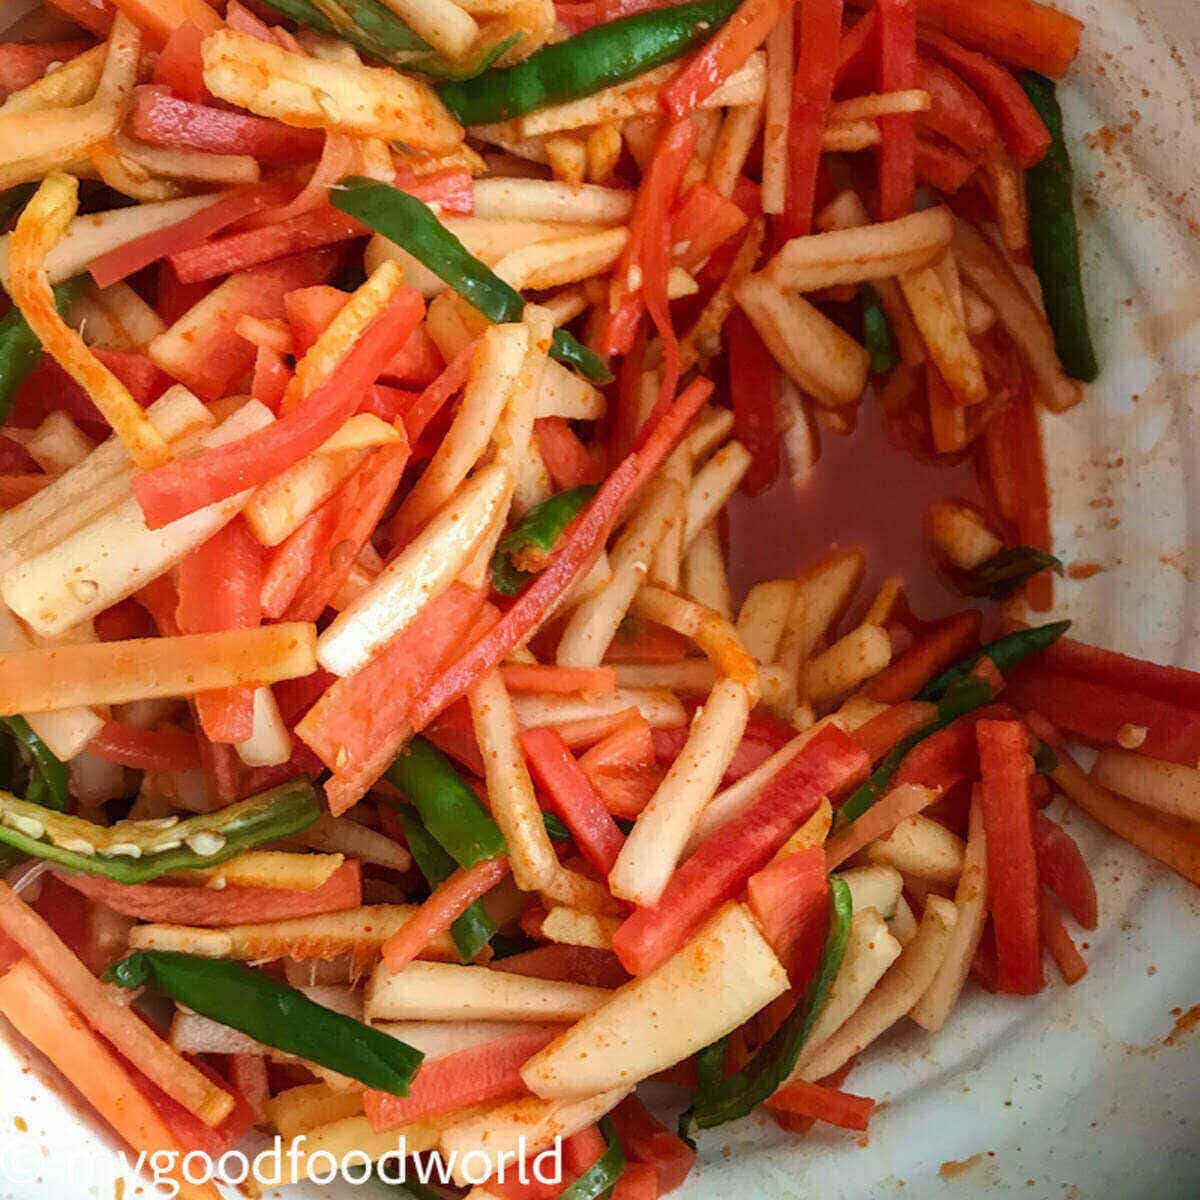 Thinly sliced carrots, mooli, green chillies and ginger in pickling juice.